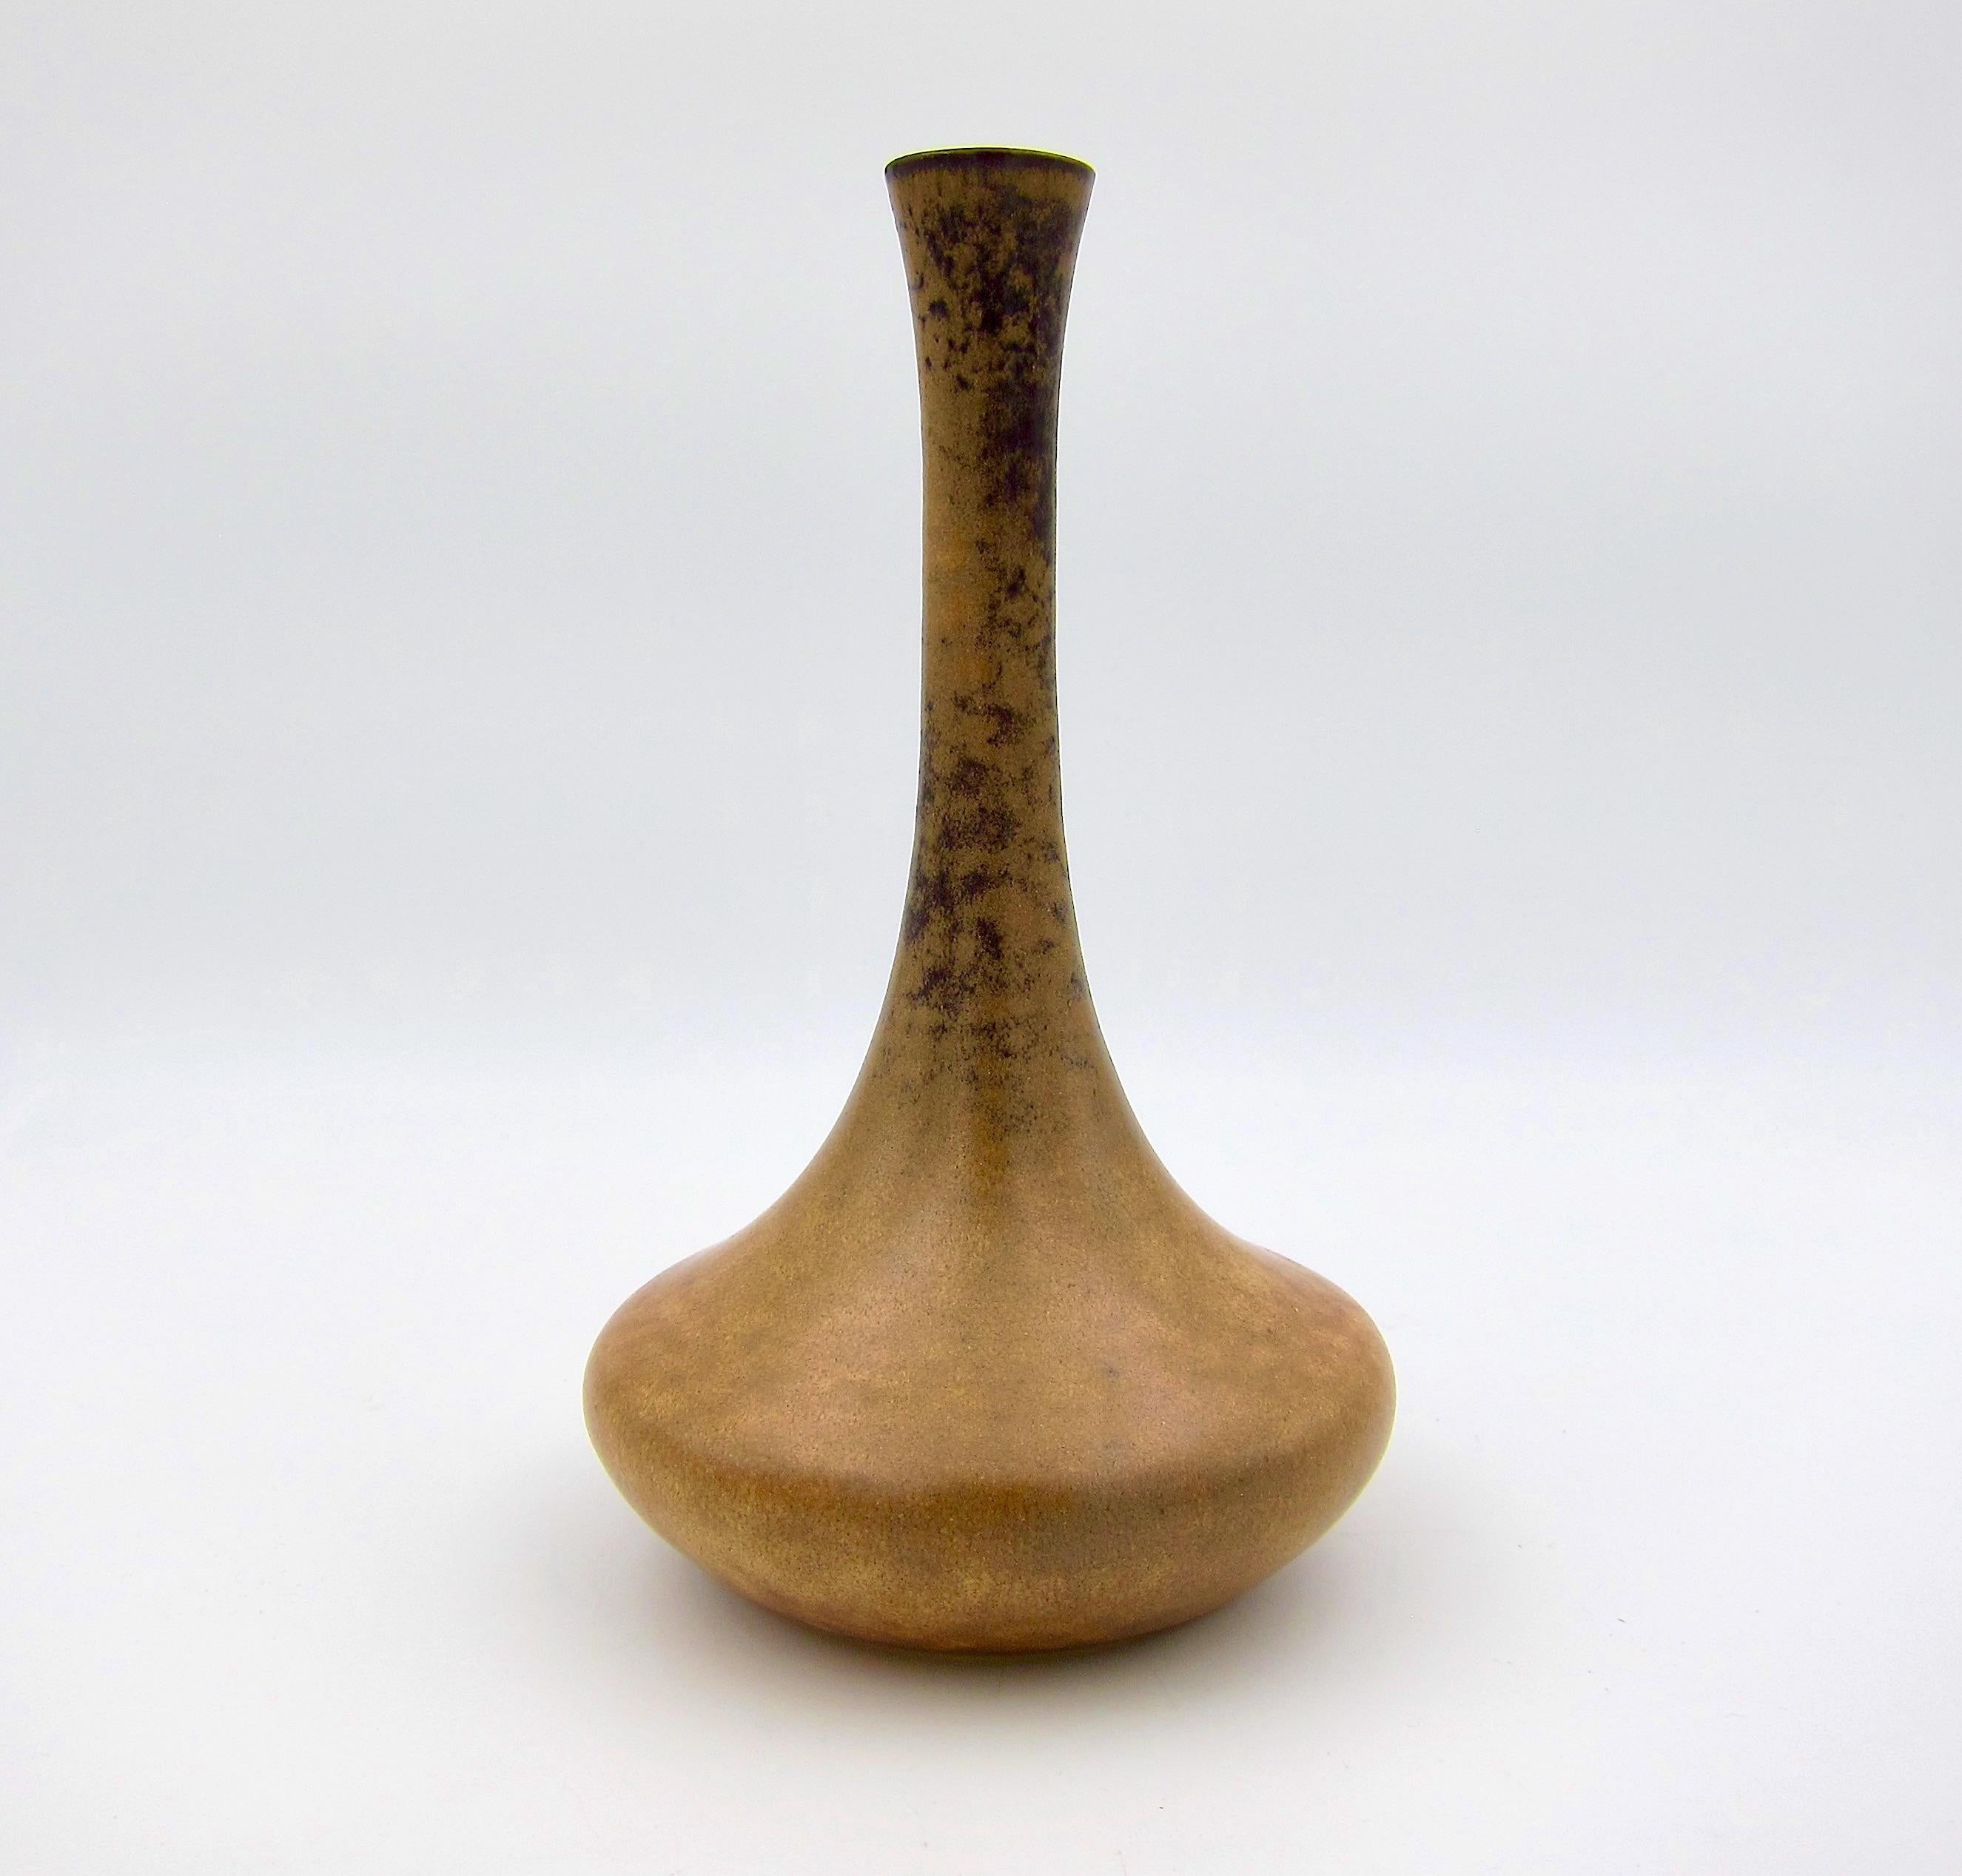 A handcrafted art pottery vase by Gabriel Musarra of Vallauris, France dating circa 1960s-1970s. The elegant bud vase features a swelling base and attenuated neck enveloped in a mottled brown matte glaze with dark brown (almost black) specked